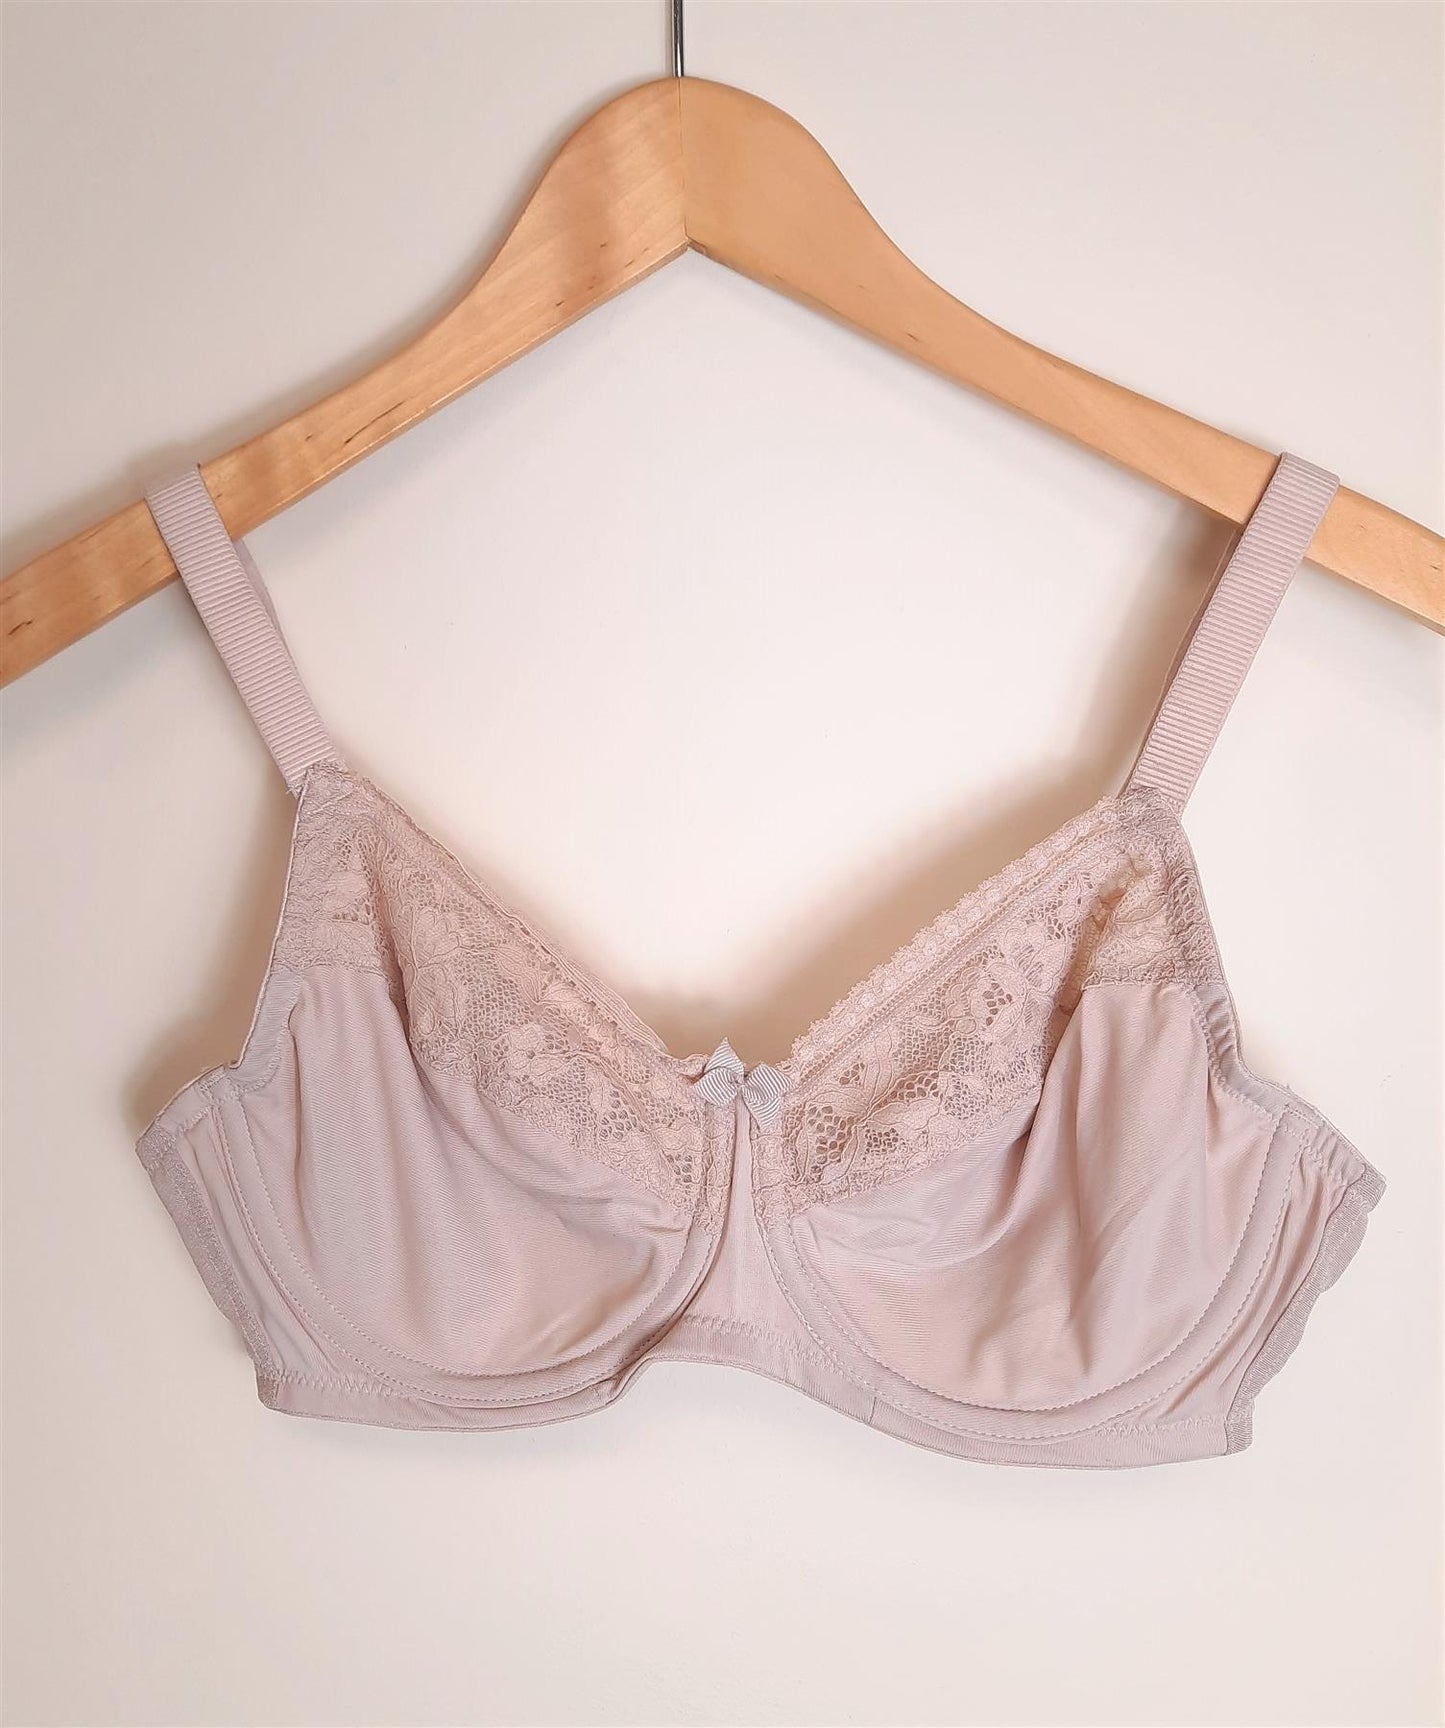 Minimiser Bra Underwired Full Cup Non-Padded Lace Trim Brand New Shop Soiled